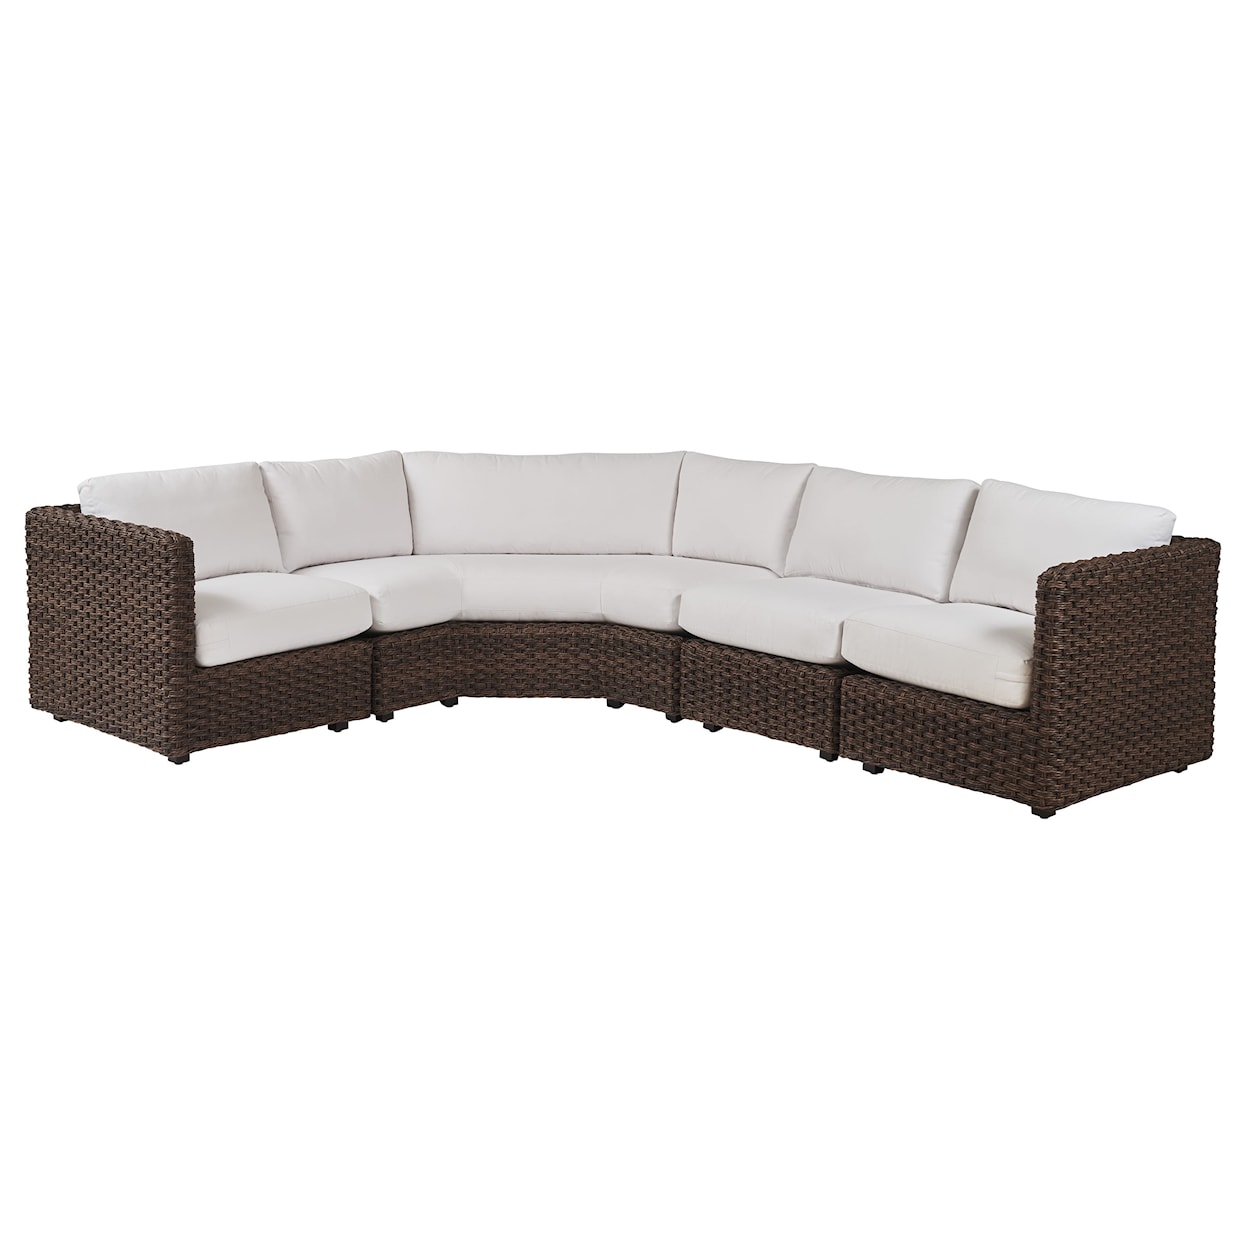 Tommy Bahama Outdoor Living Kilimanjaro 4-Seat Outdoor Sectional